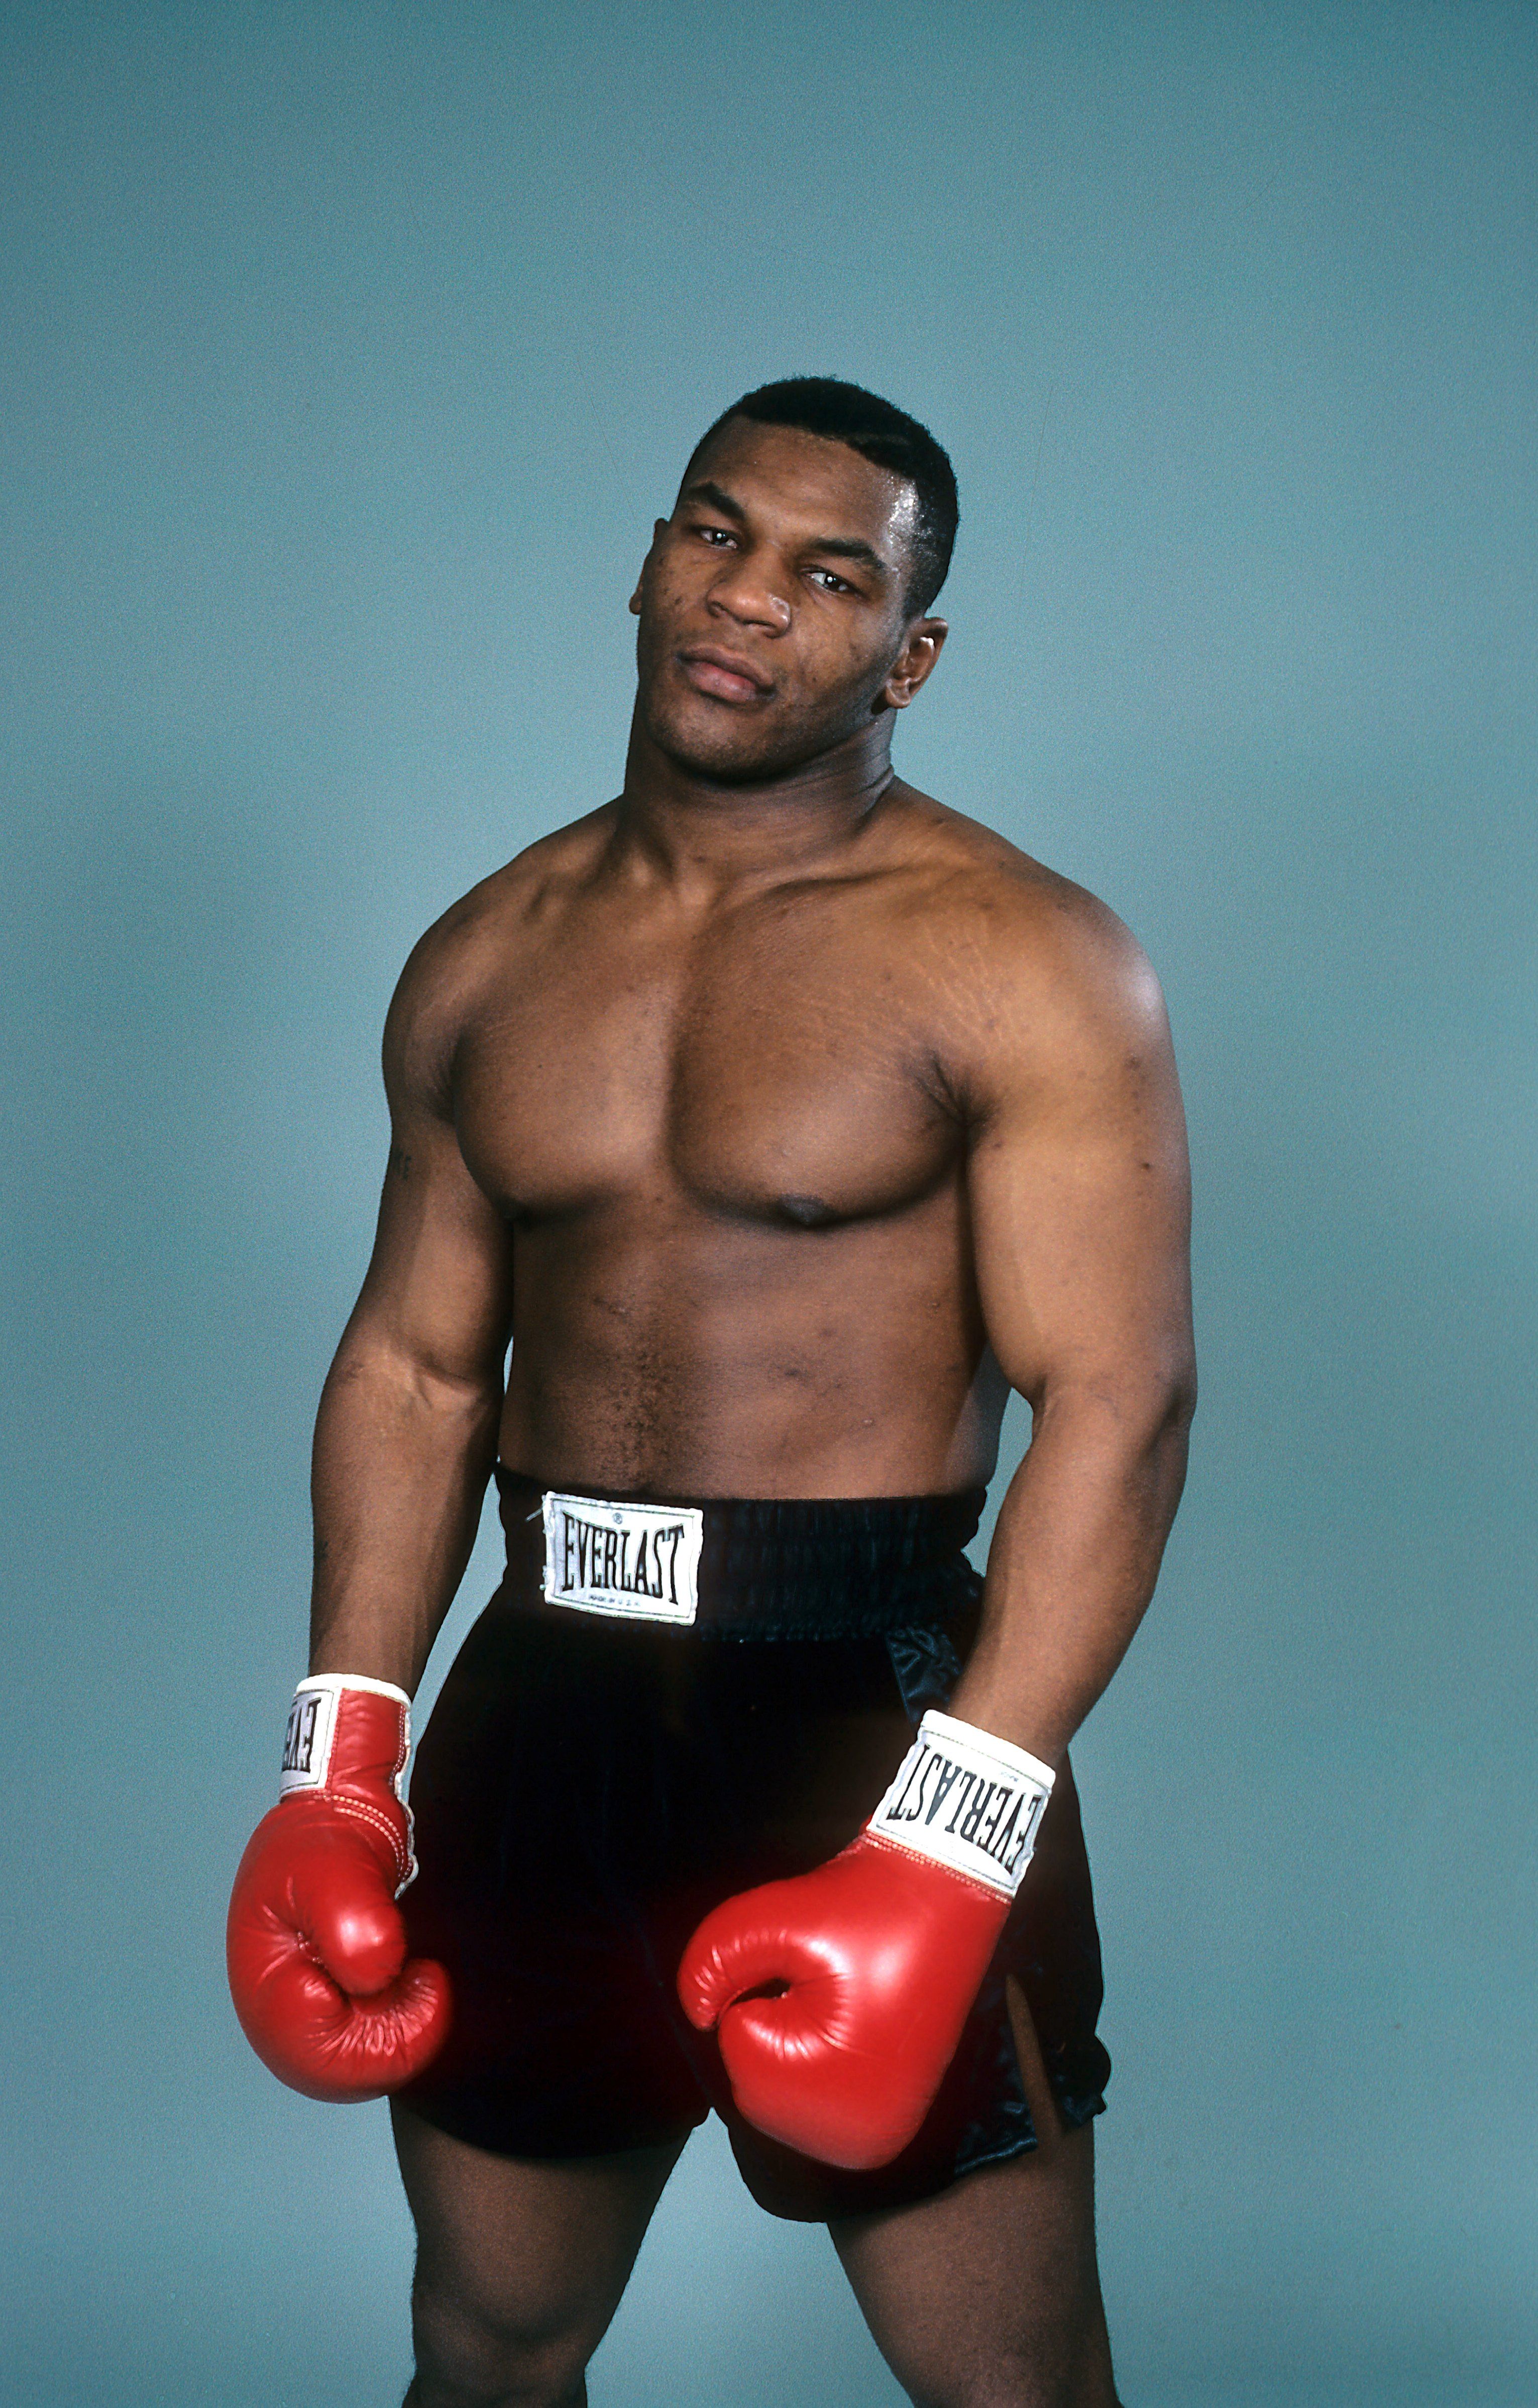 Mike Tyson Just Revealed His 'Greatest' and 'Toughest' Fights